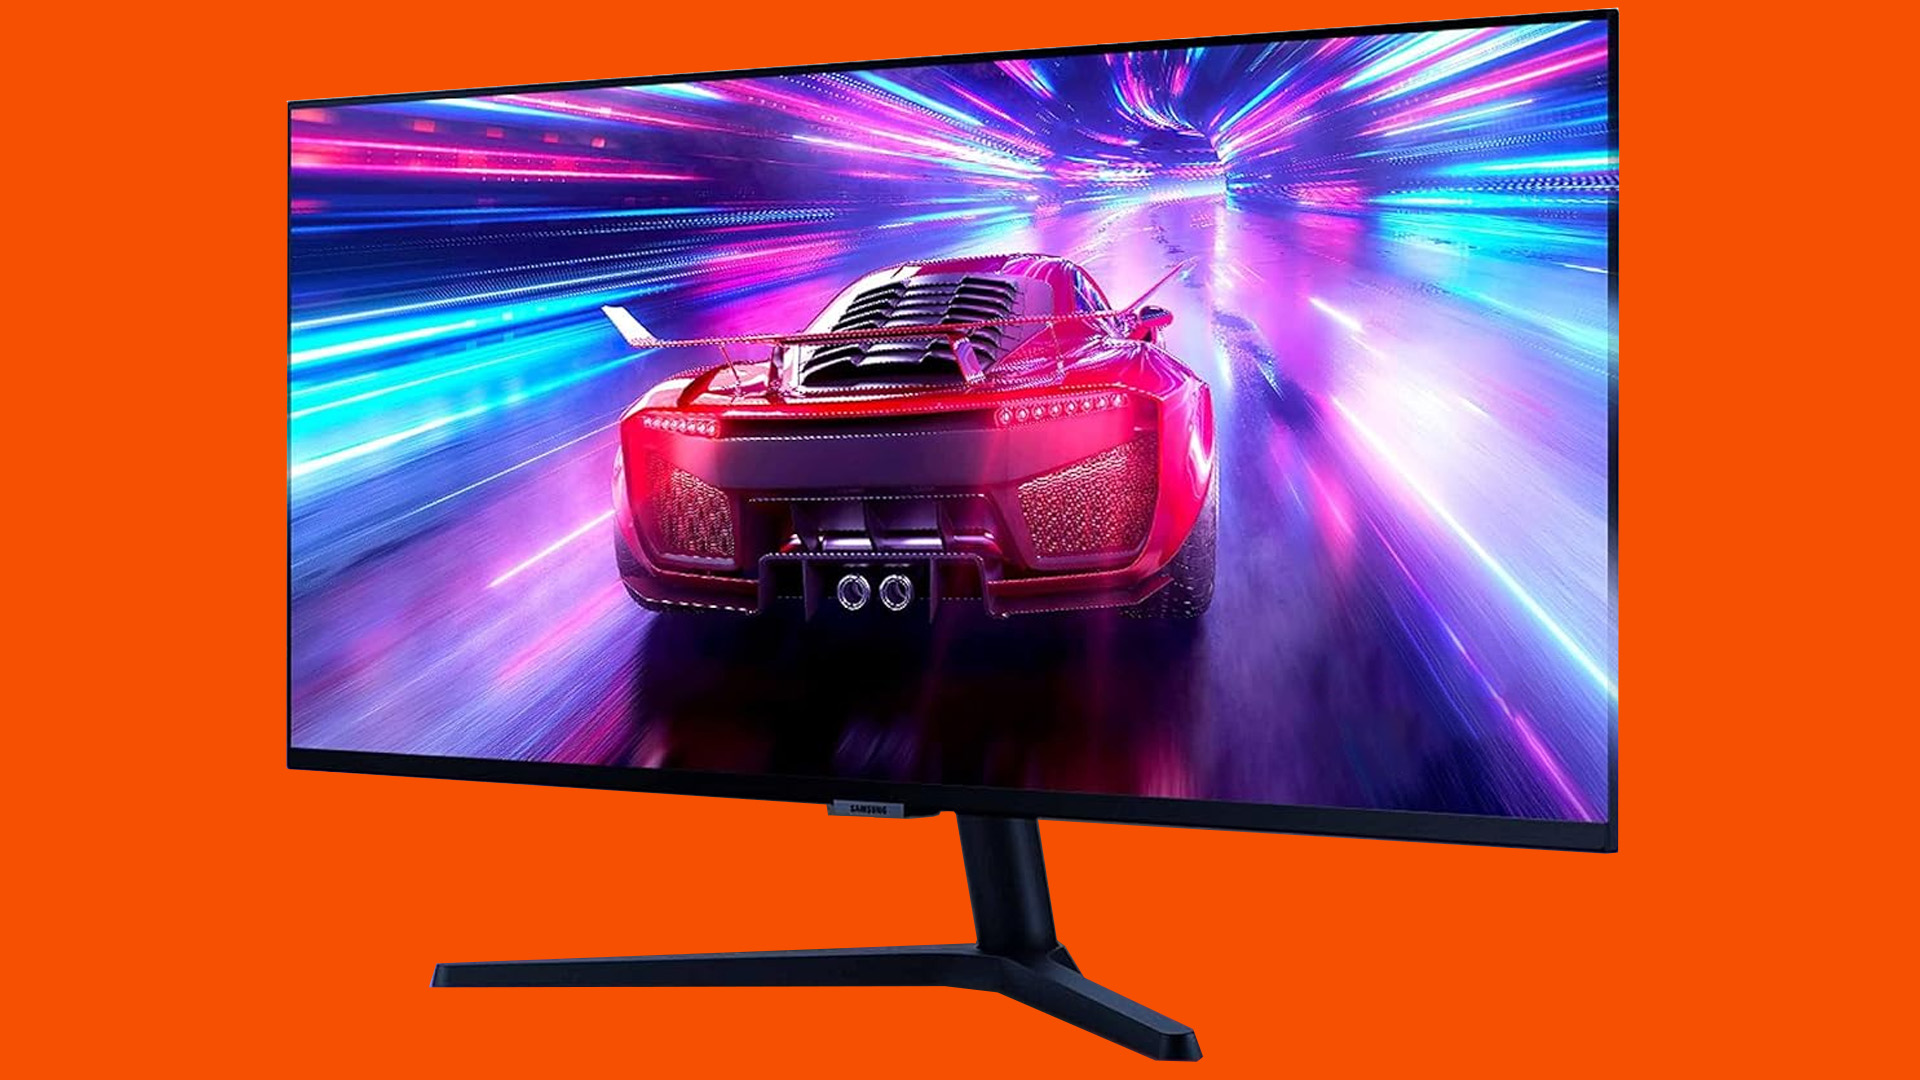 Save 31% on this amazing 34-inch Samsung gaming monitor